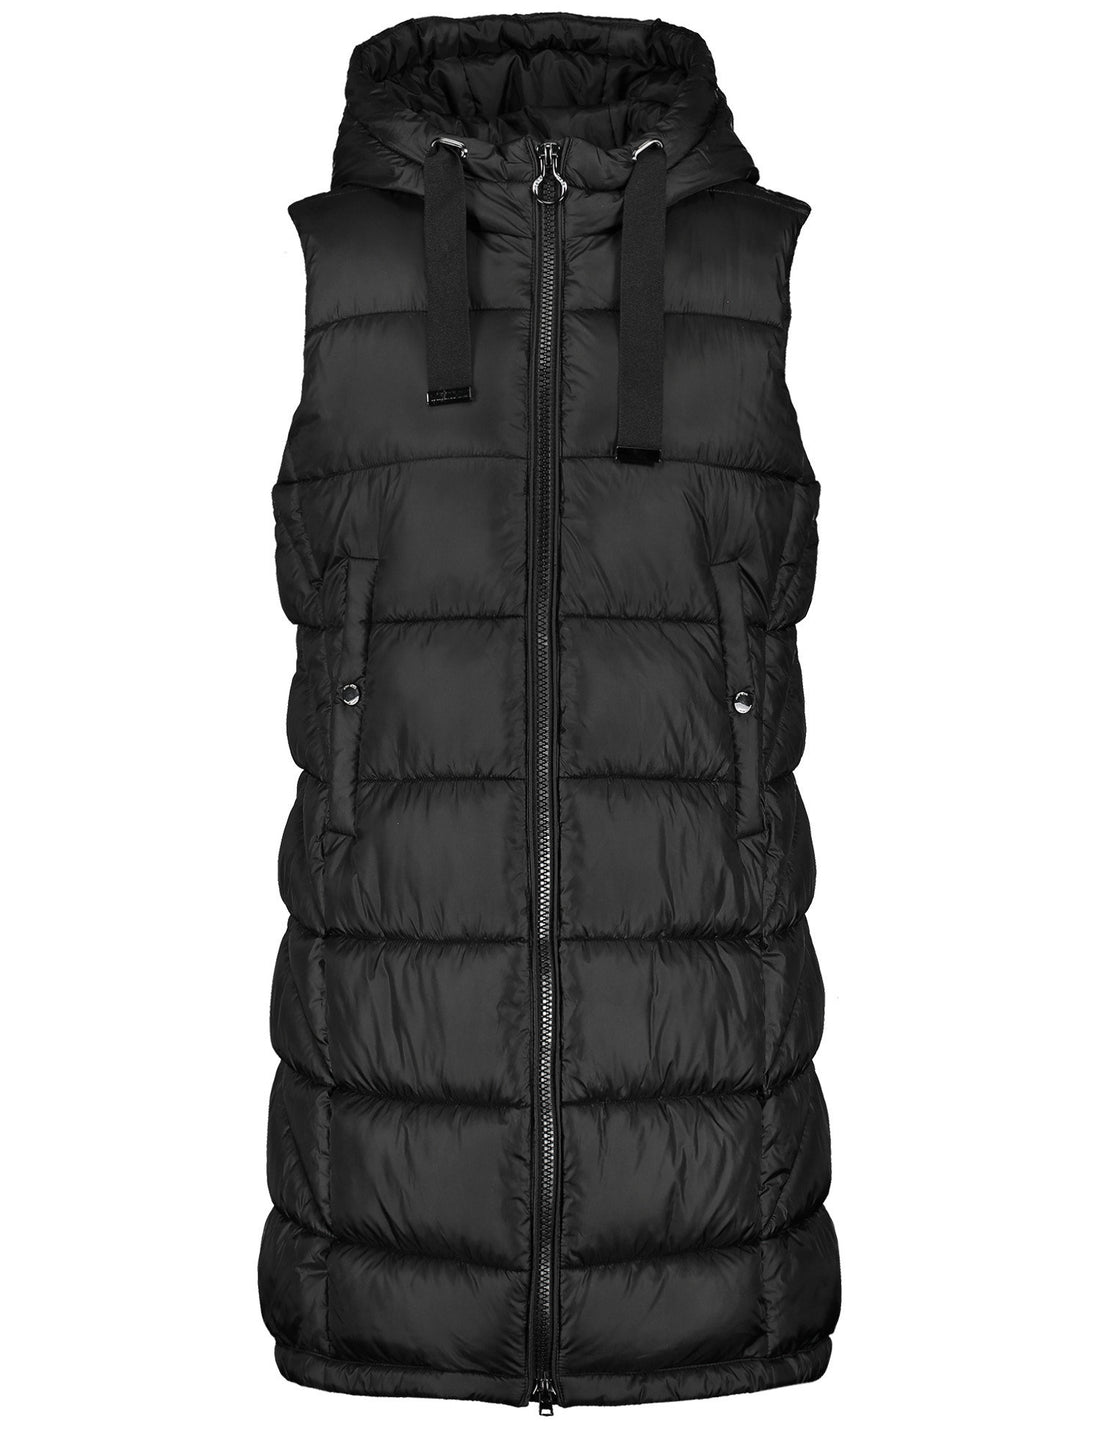 Long Body Warmer With A Down Feel And A Drawstring_945506-31193_11000_01